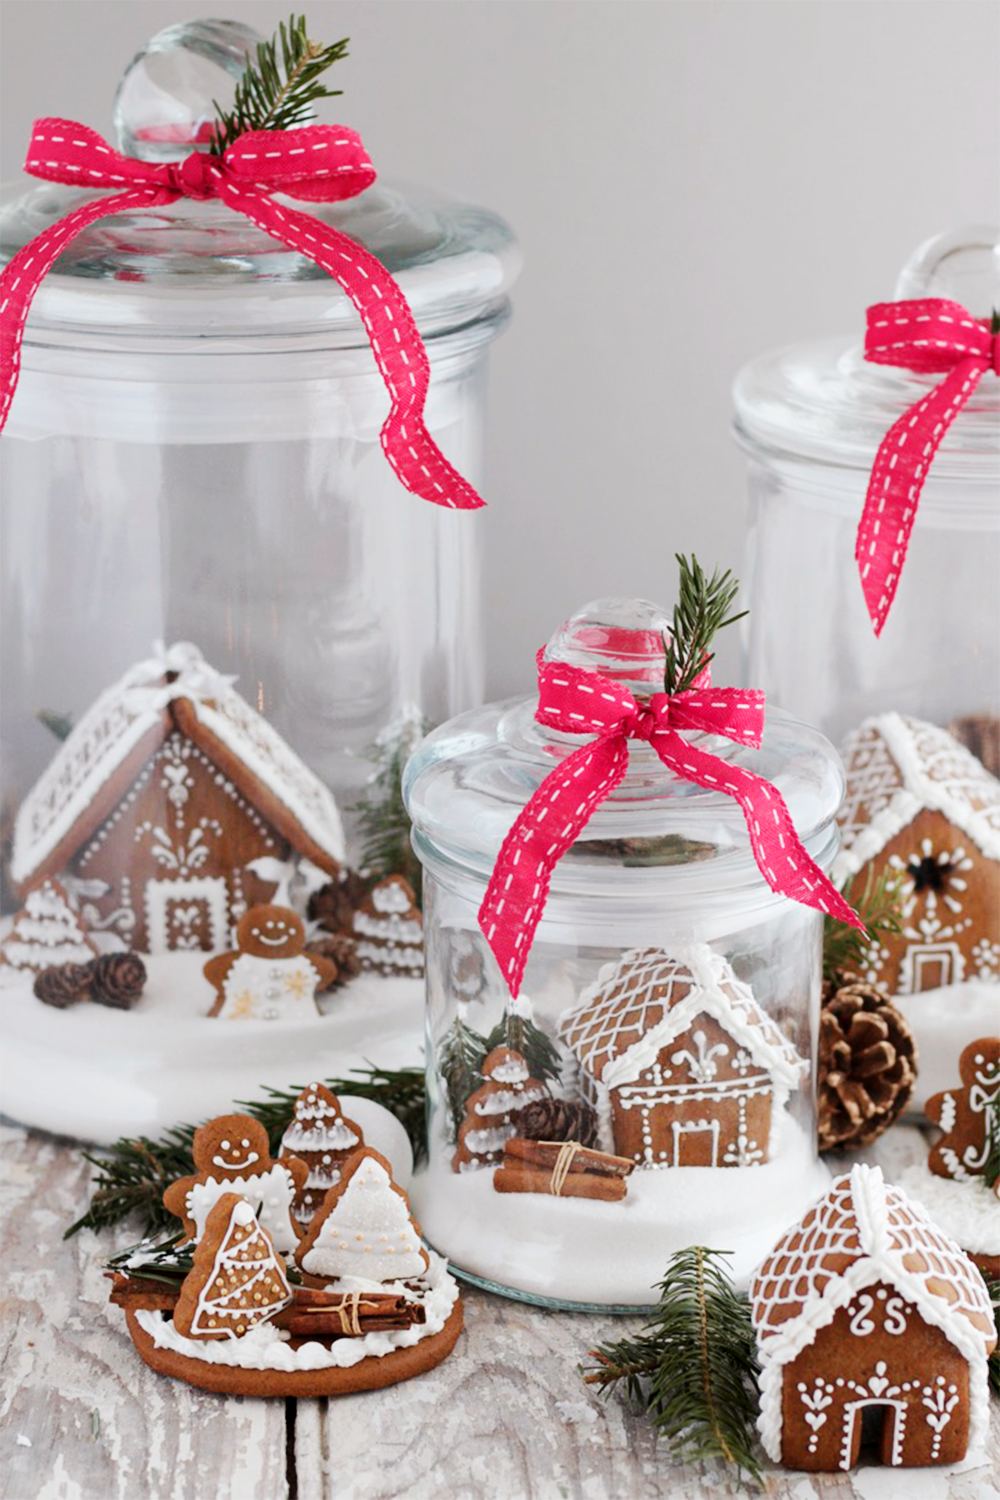 Gingerbread houses that are as sweet to look at as they are to eat.